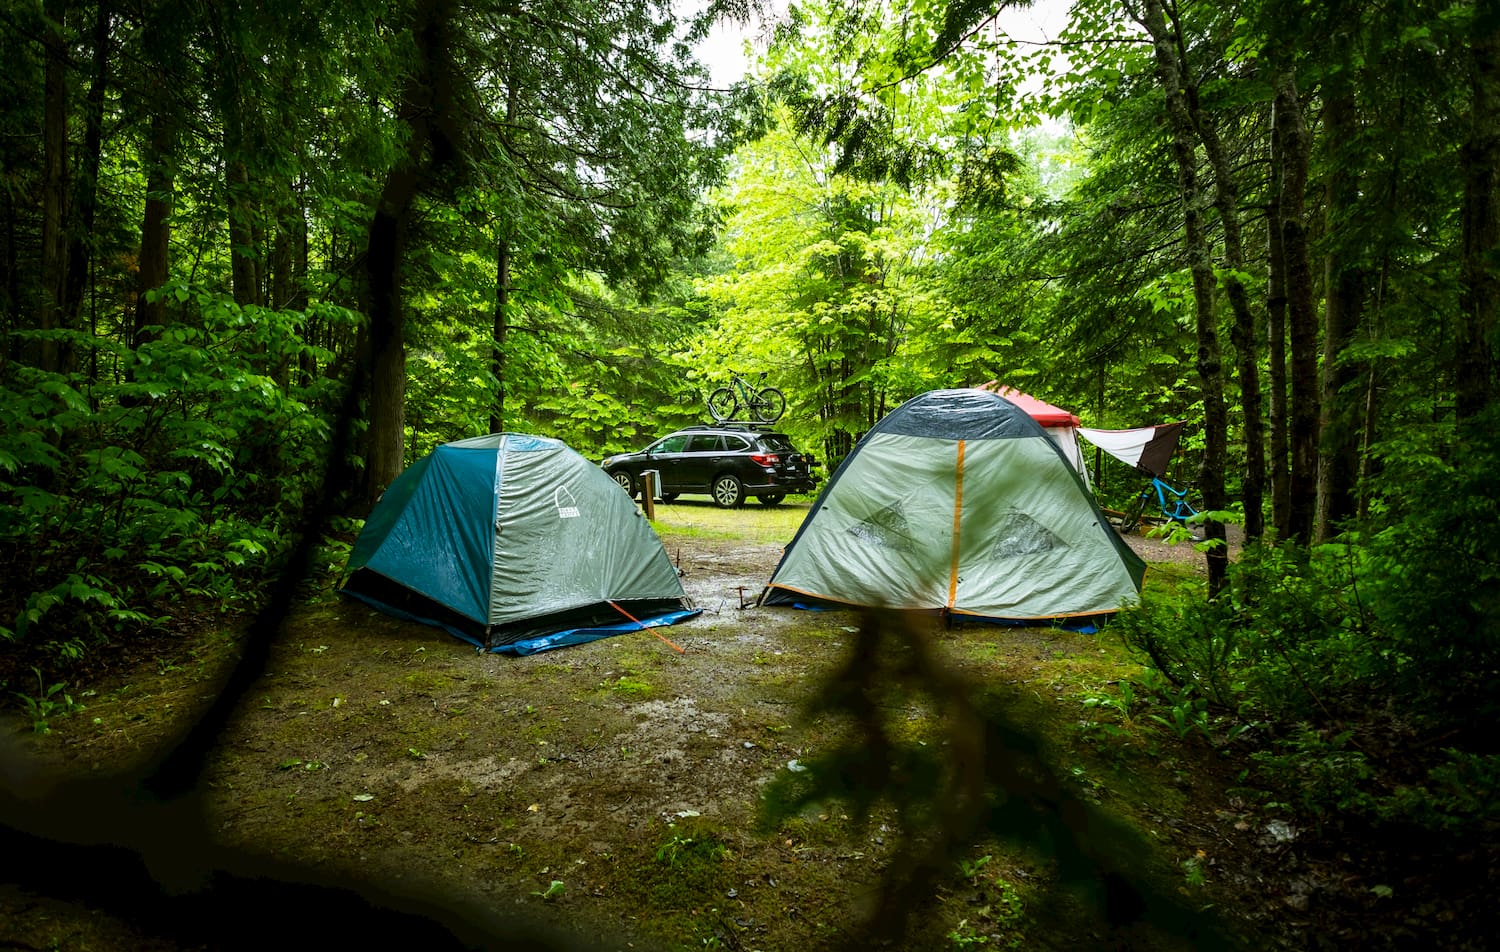 Car parked in the forest beside two tents.